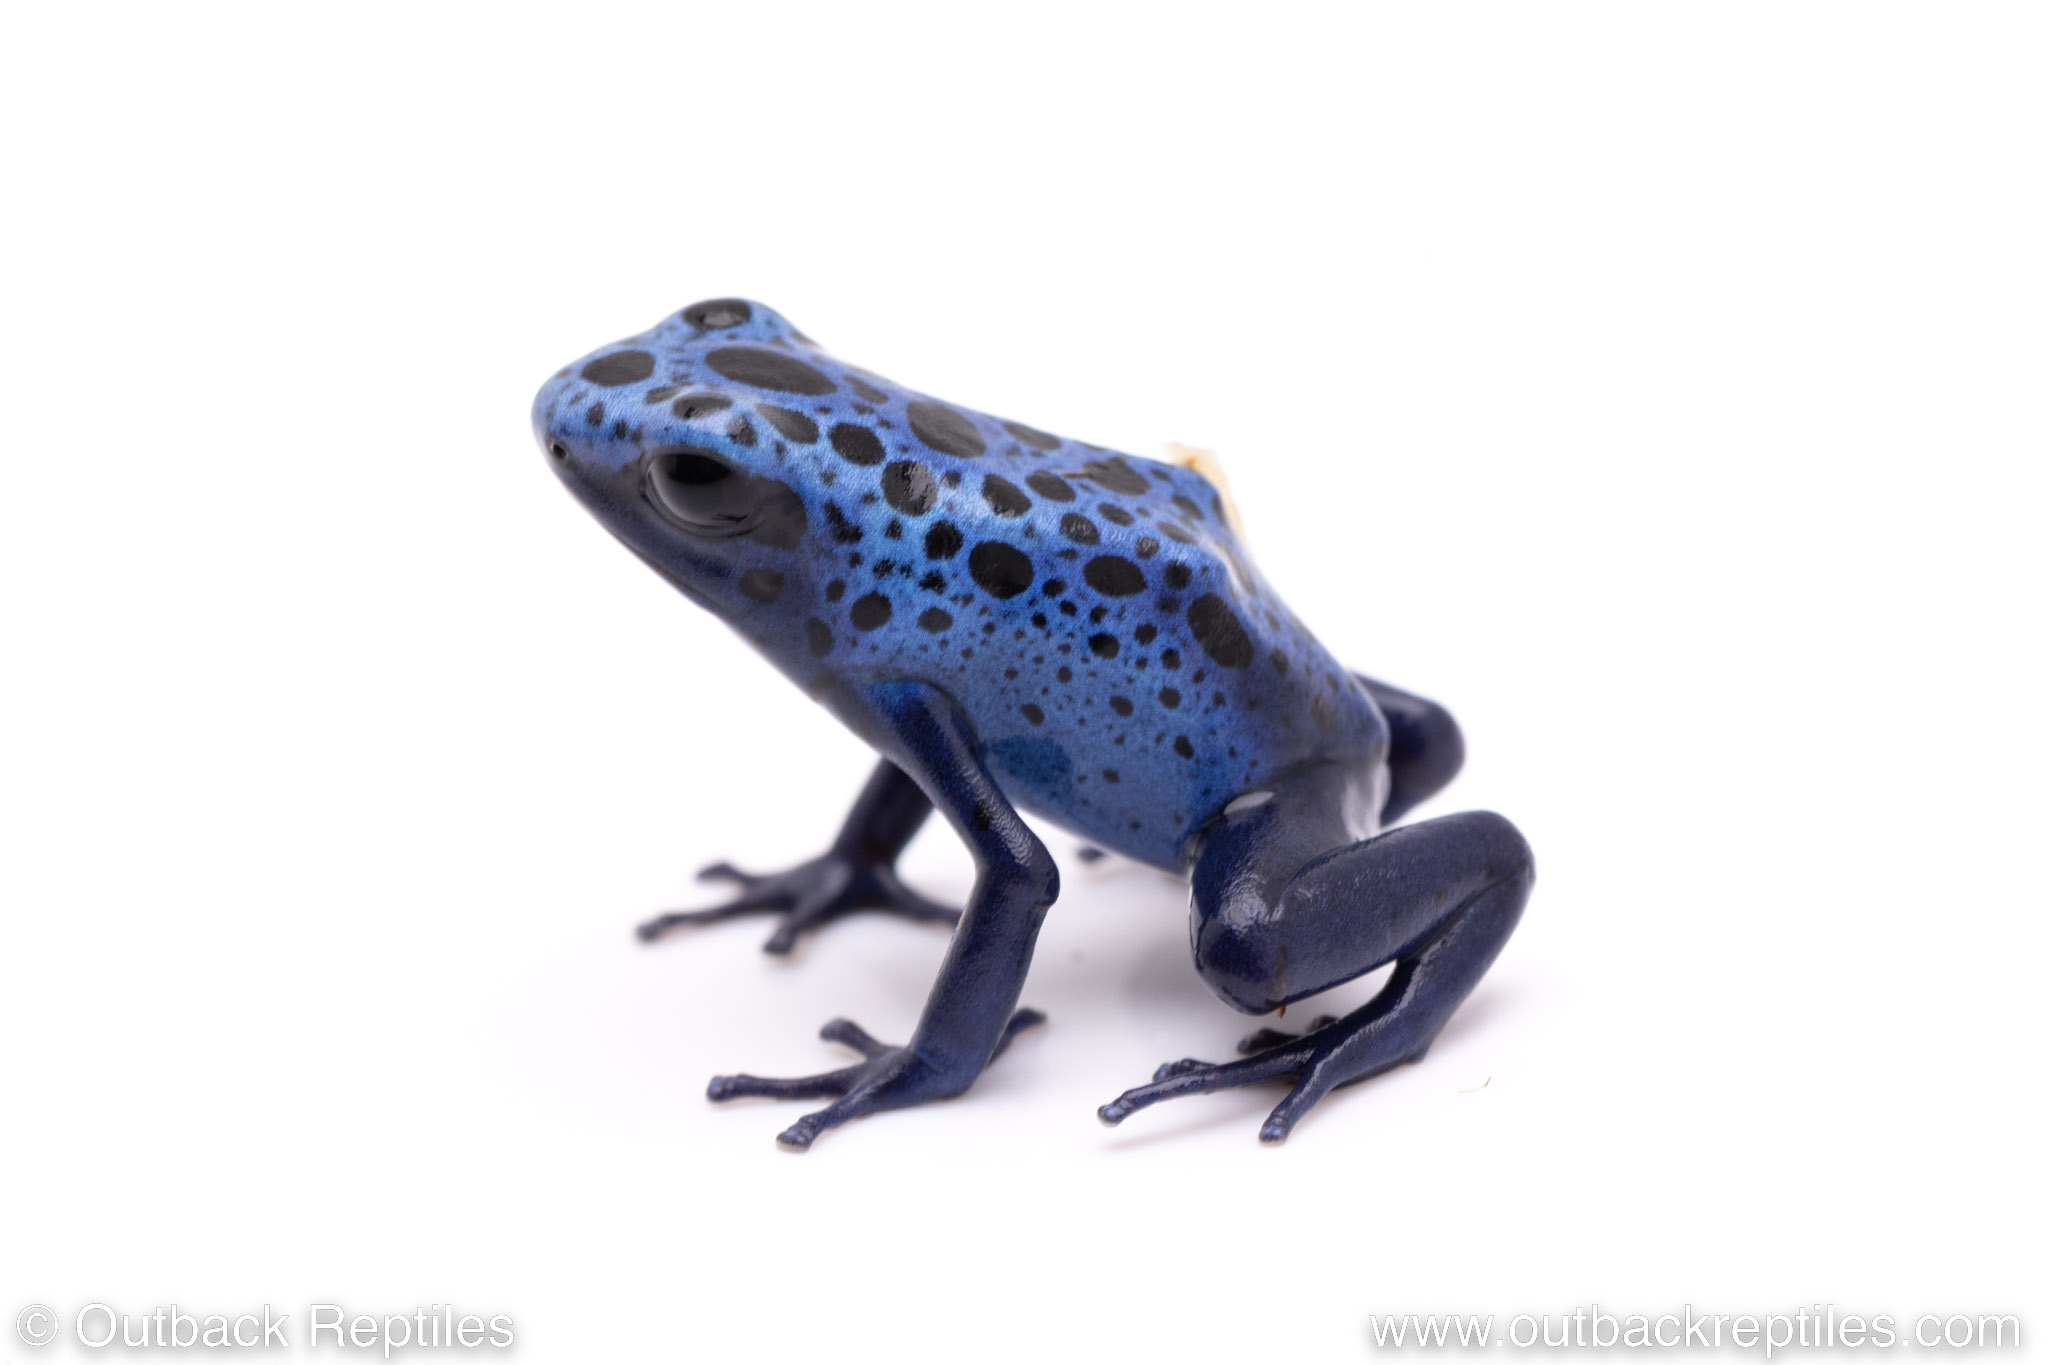 Frogs for Sale  Reptiles for Sale